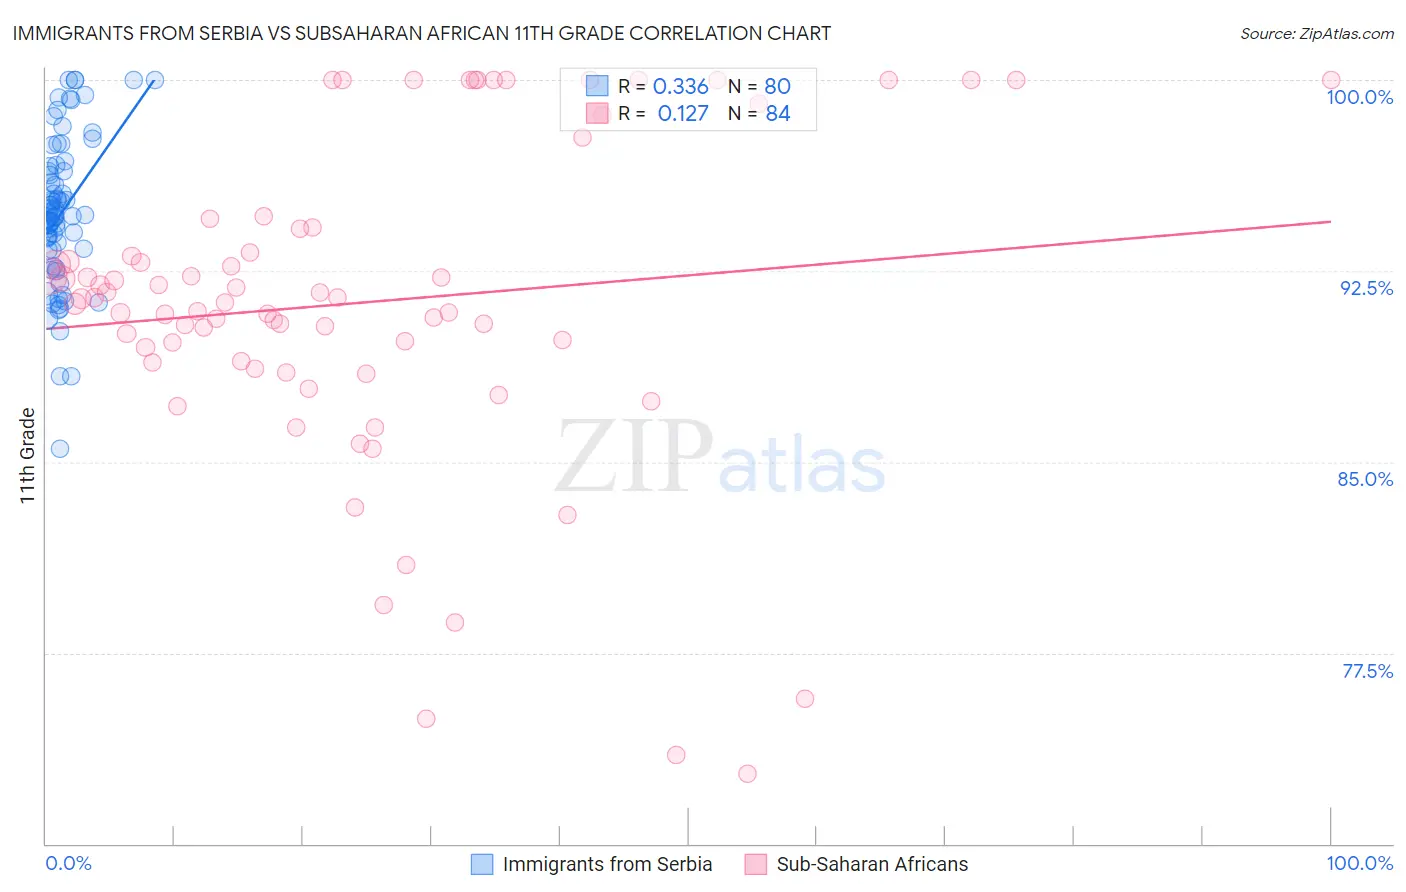 Immigrants from Serbia vs Subsaharan African 11th Grade